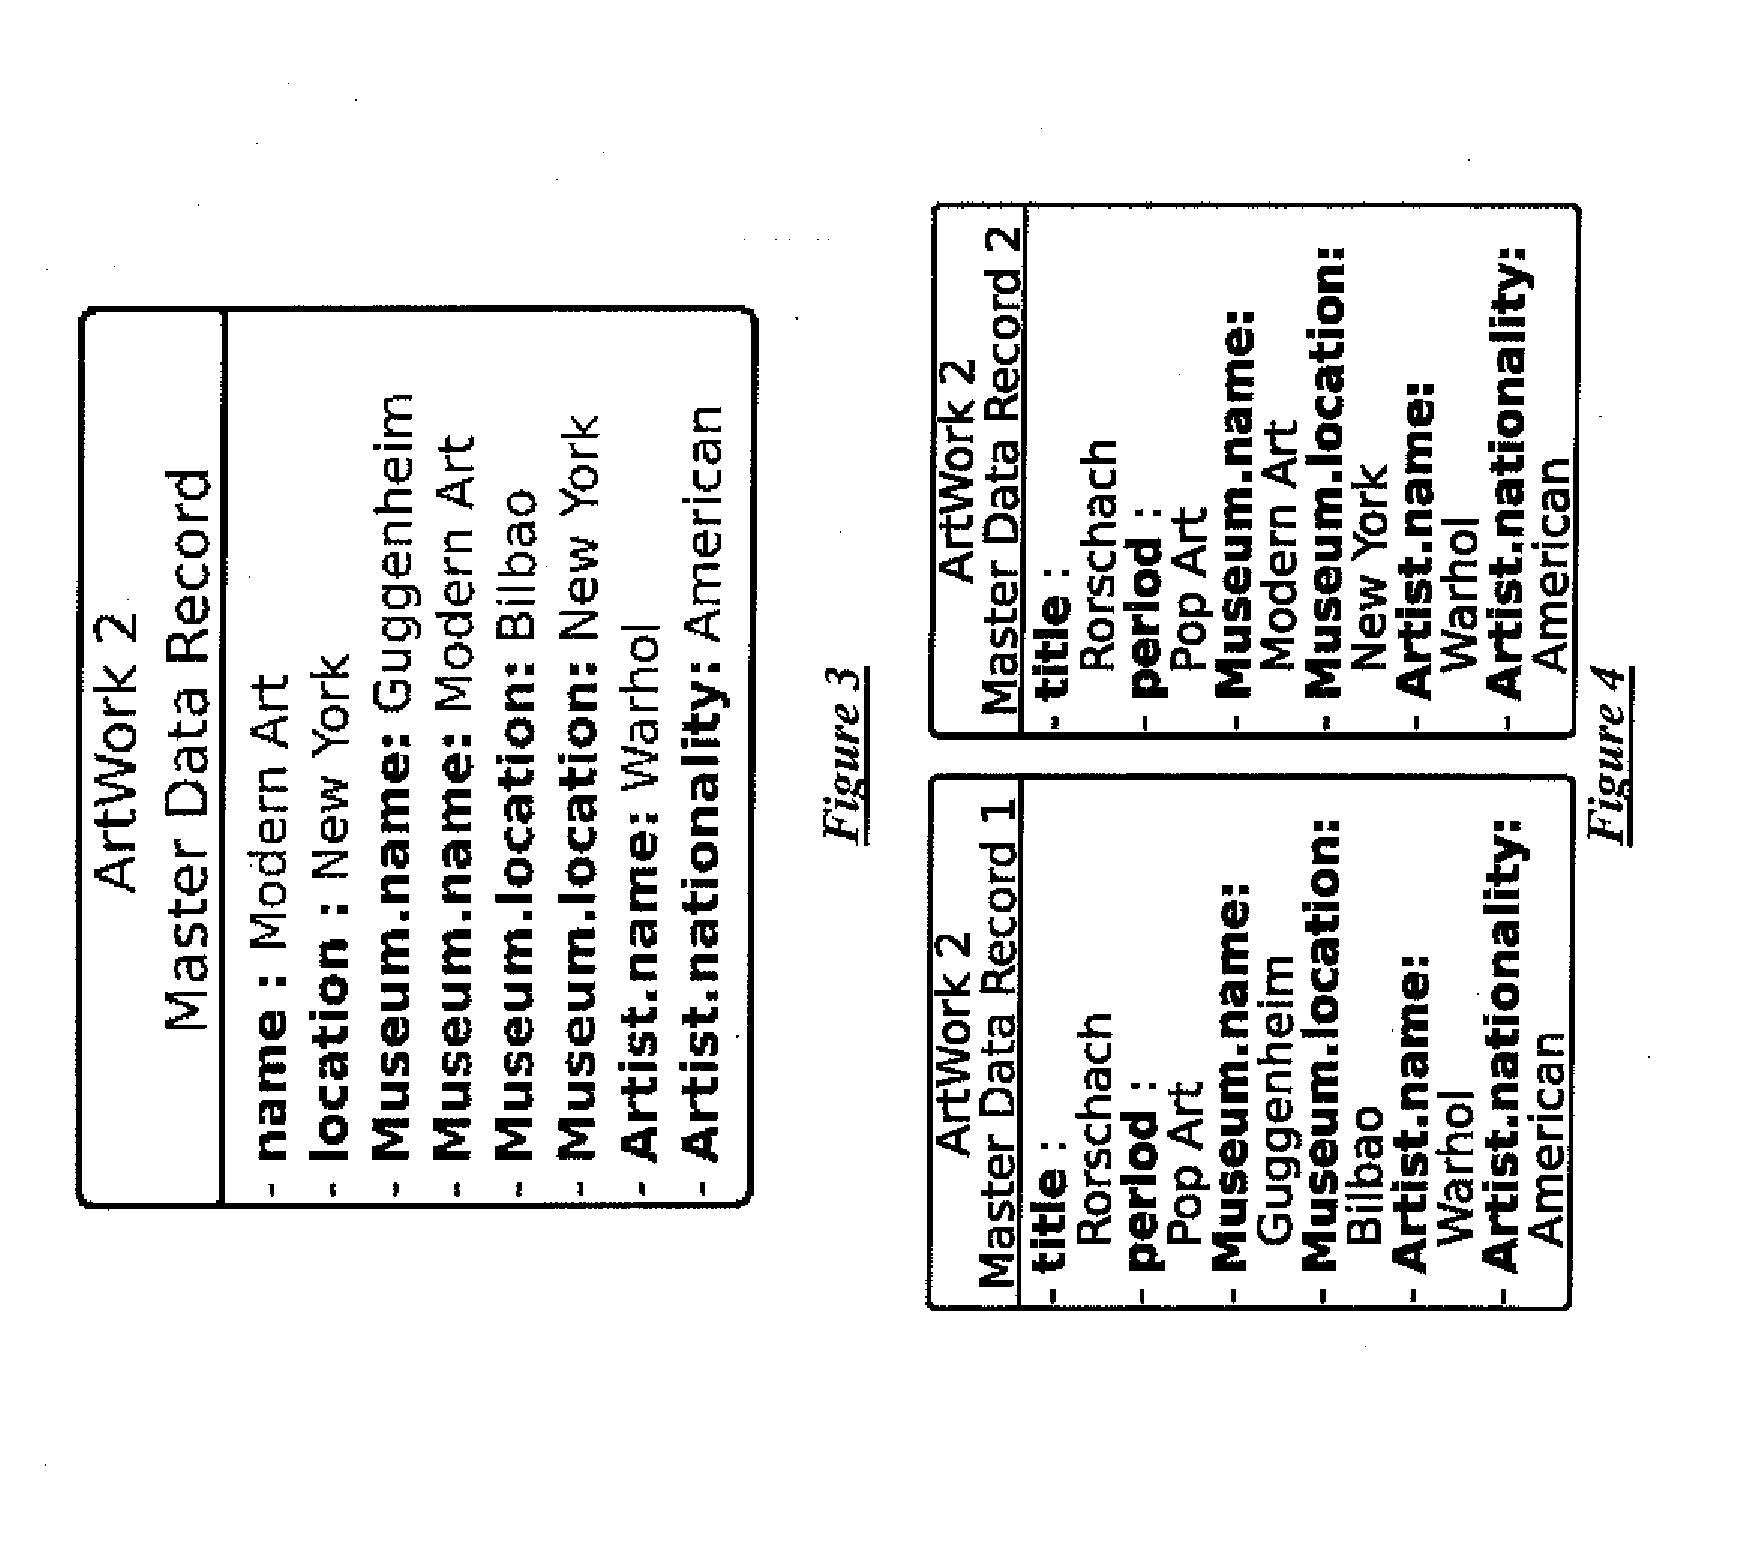 Method and system for navigating complex data sets